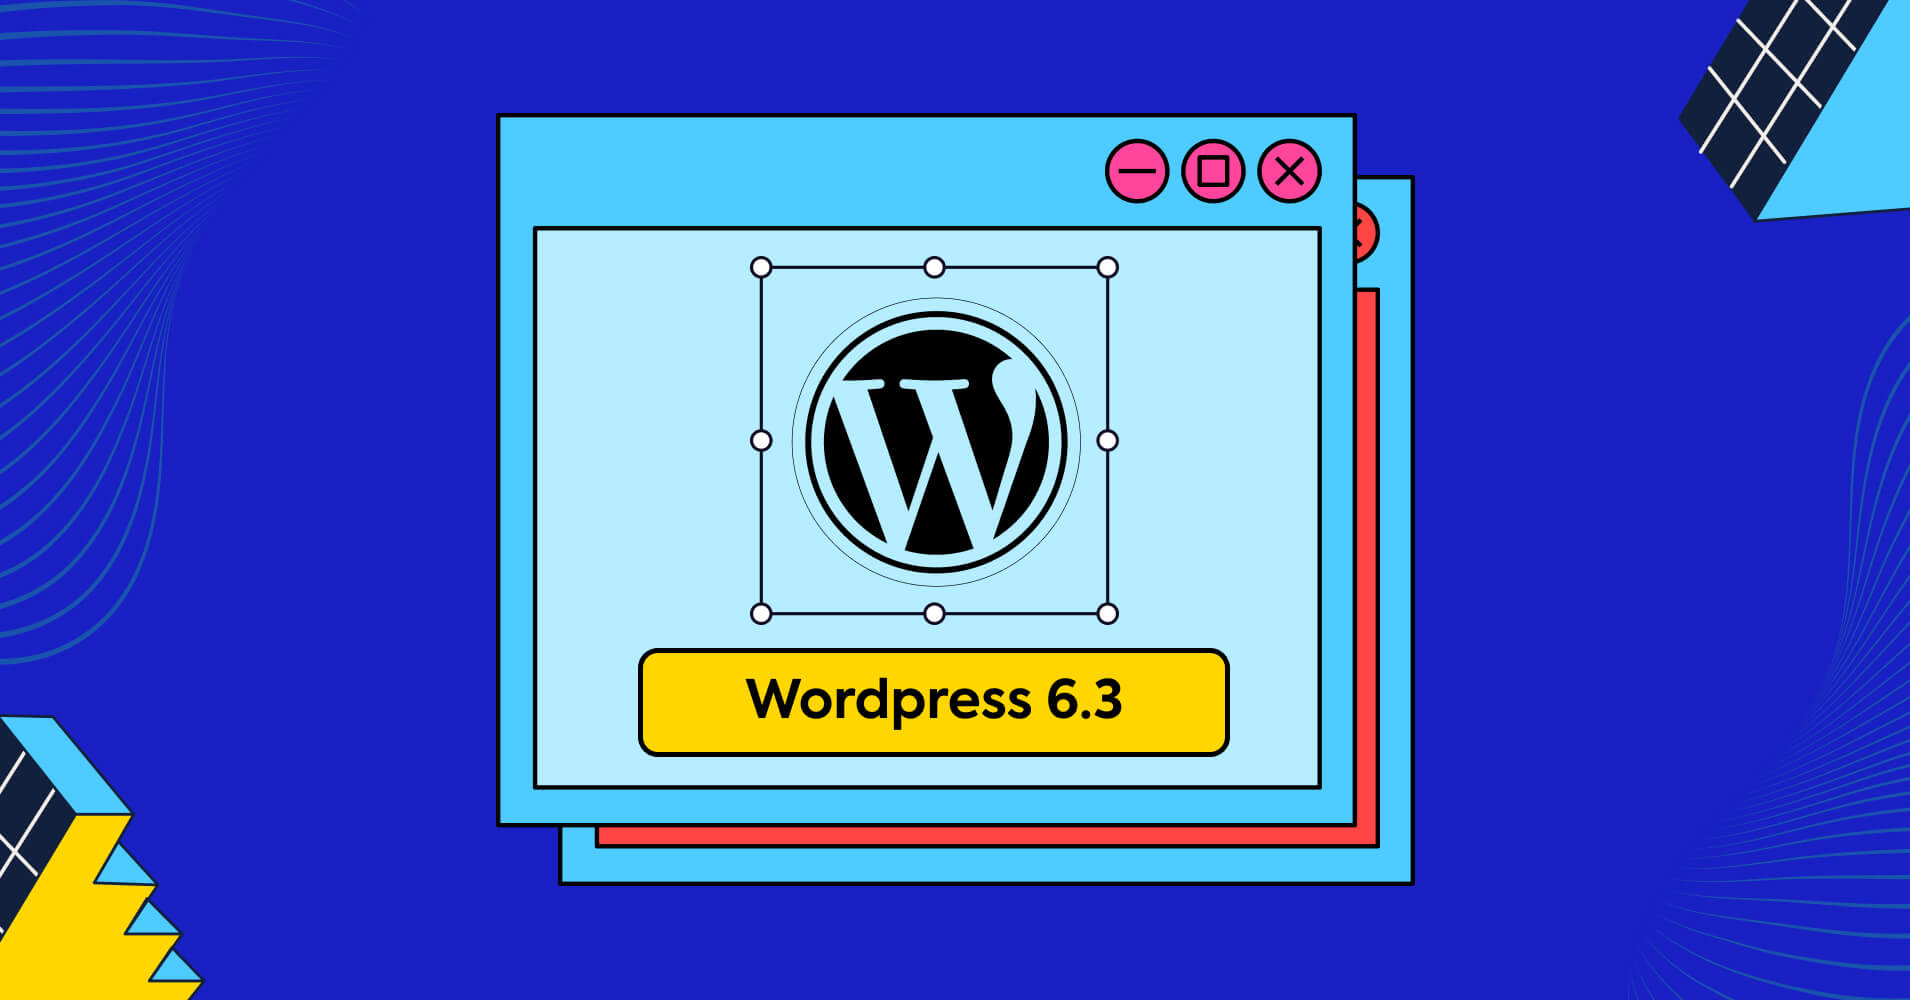 What's coming in WordPress 6.3?